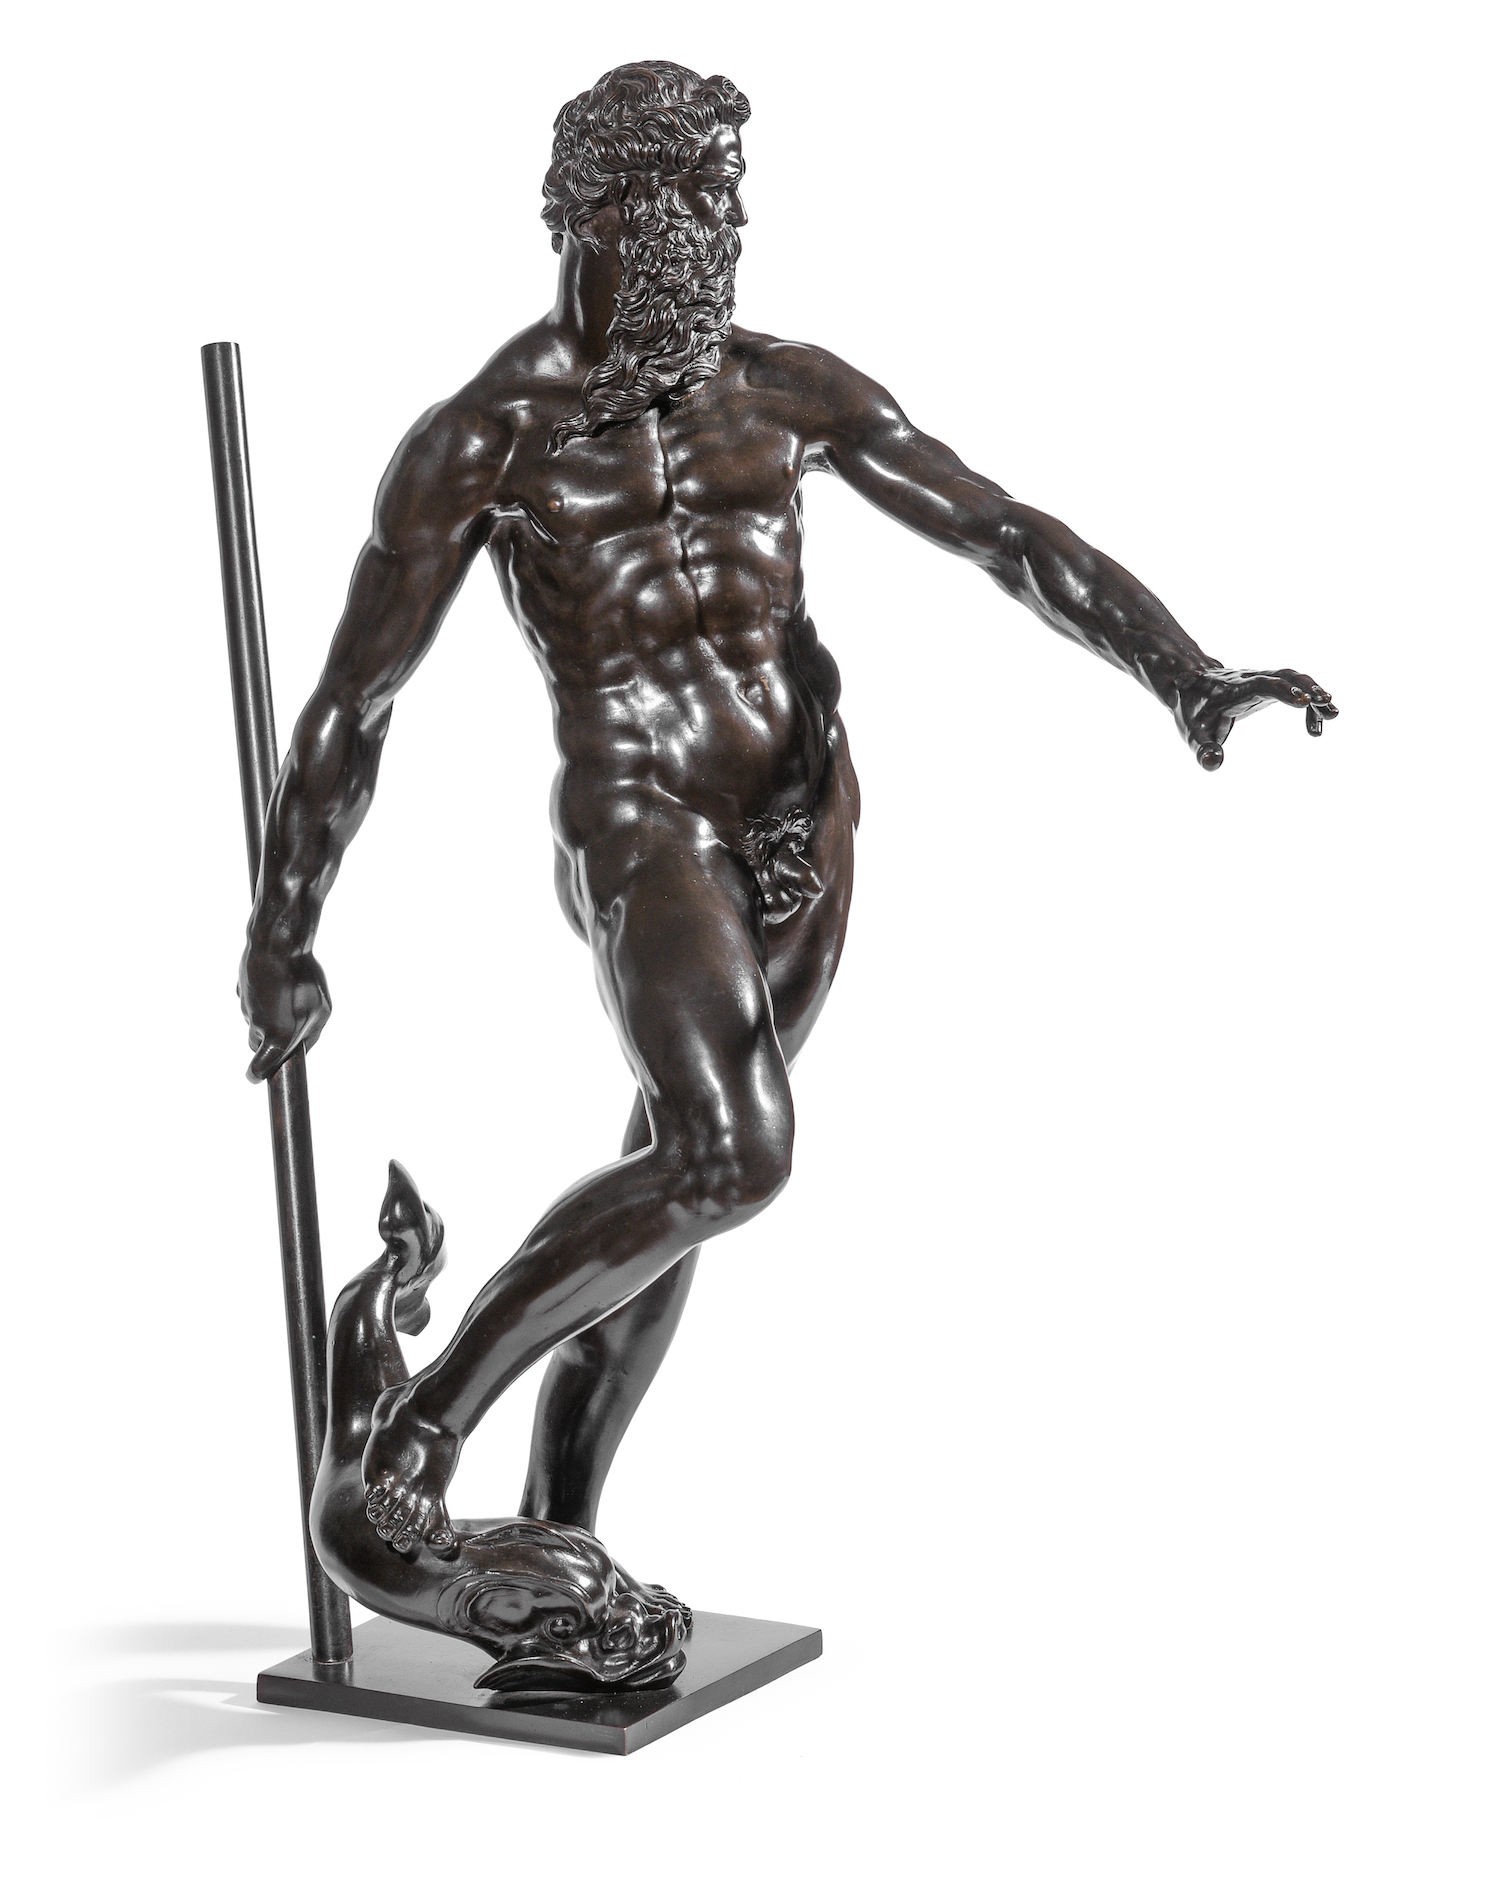 After a model by Giambologna (1529-1608) a bronze figure of Neptune